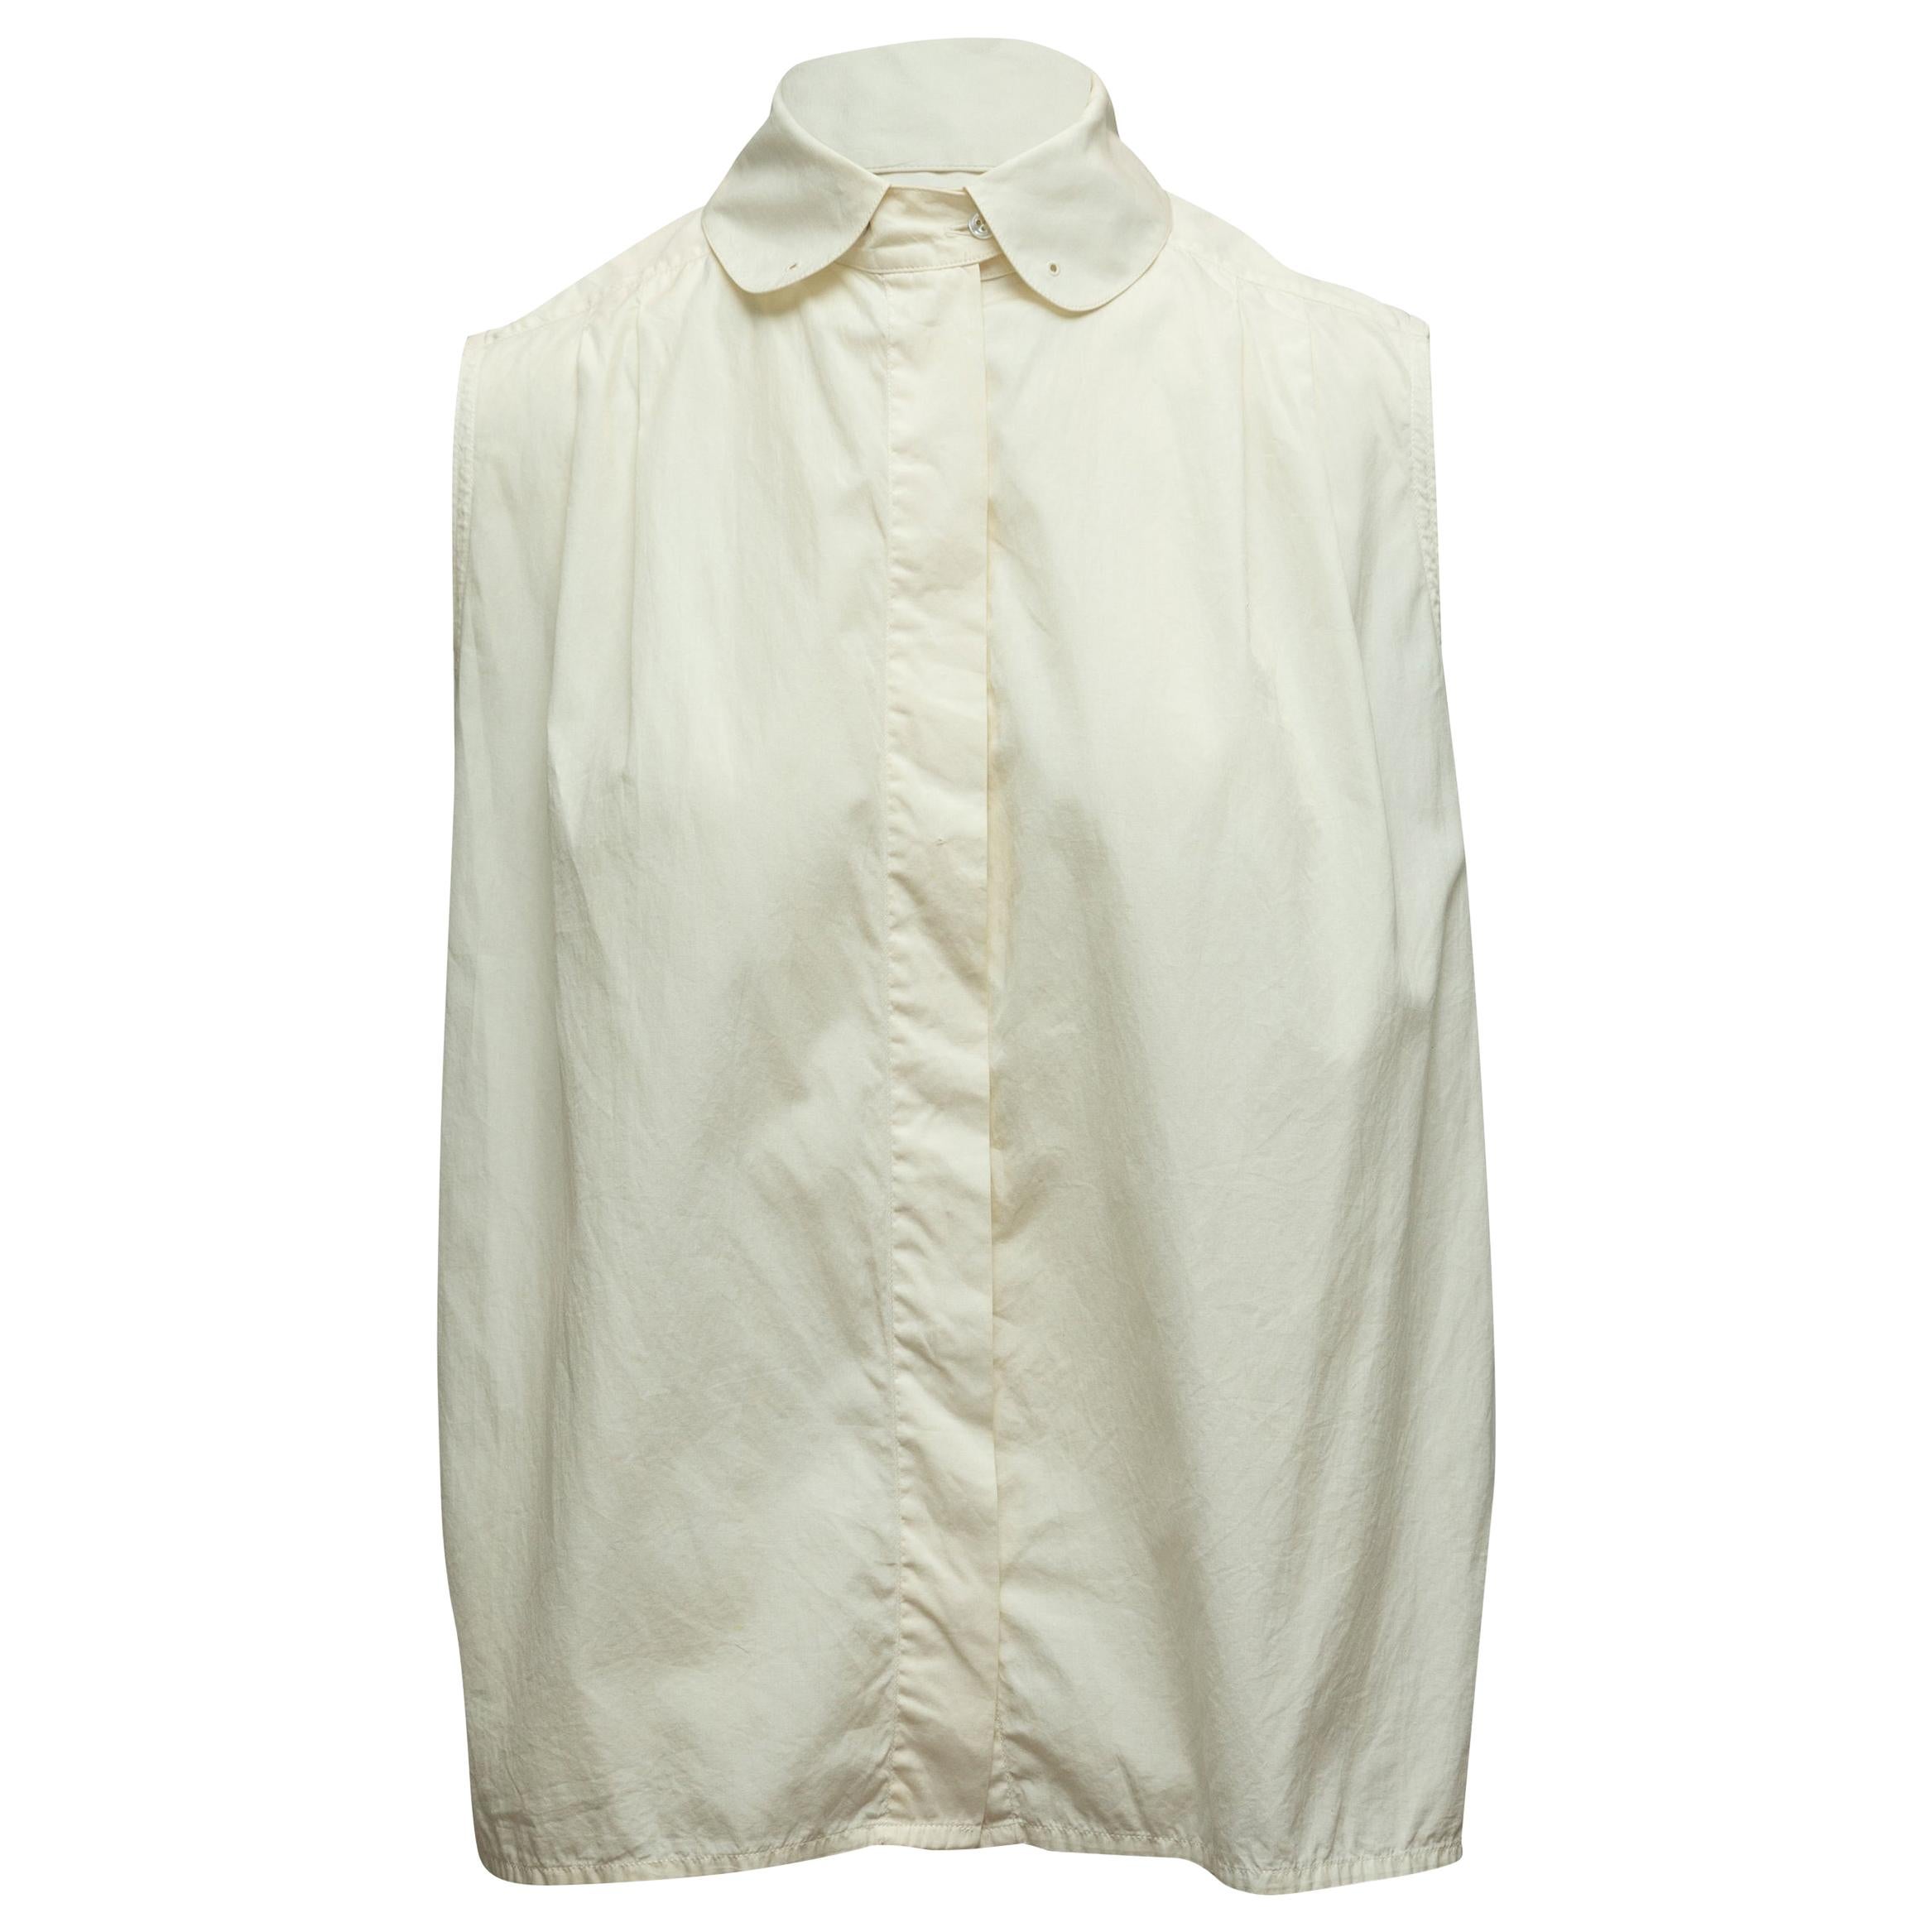 Chanel White Sleeveless Collared Top